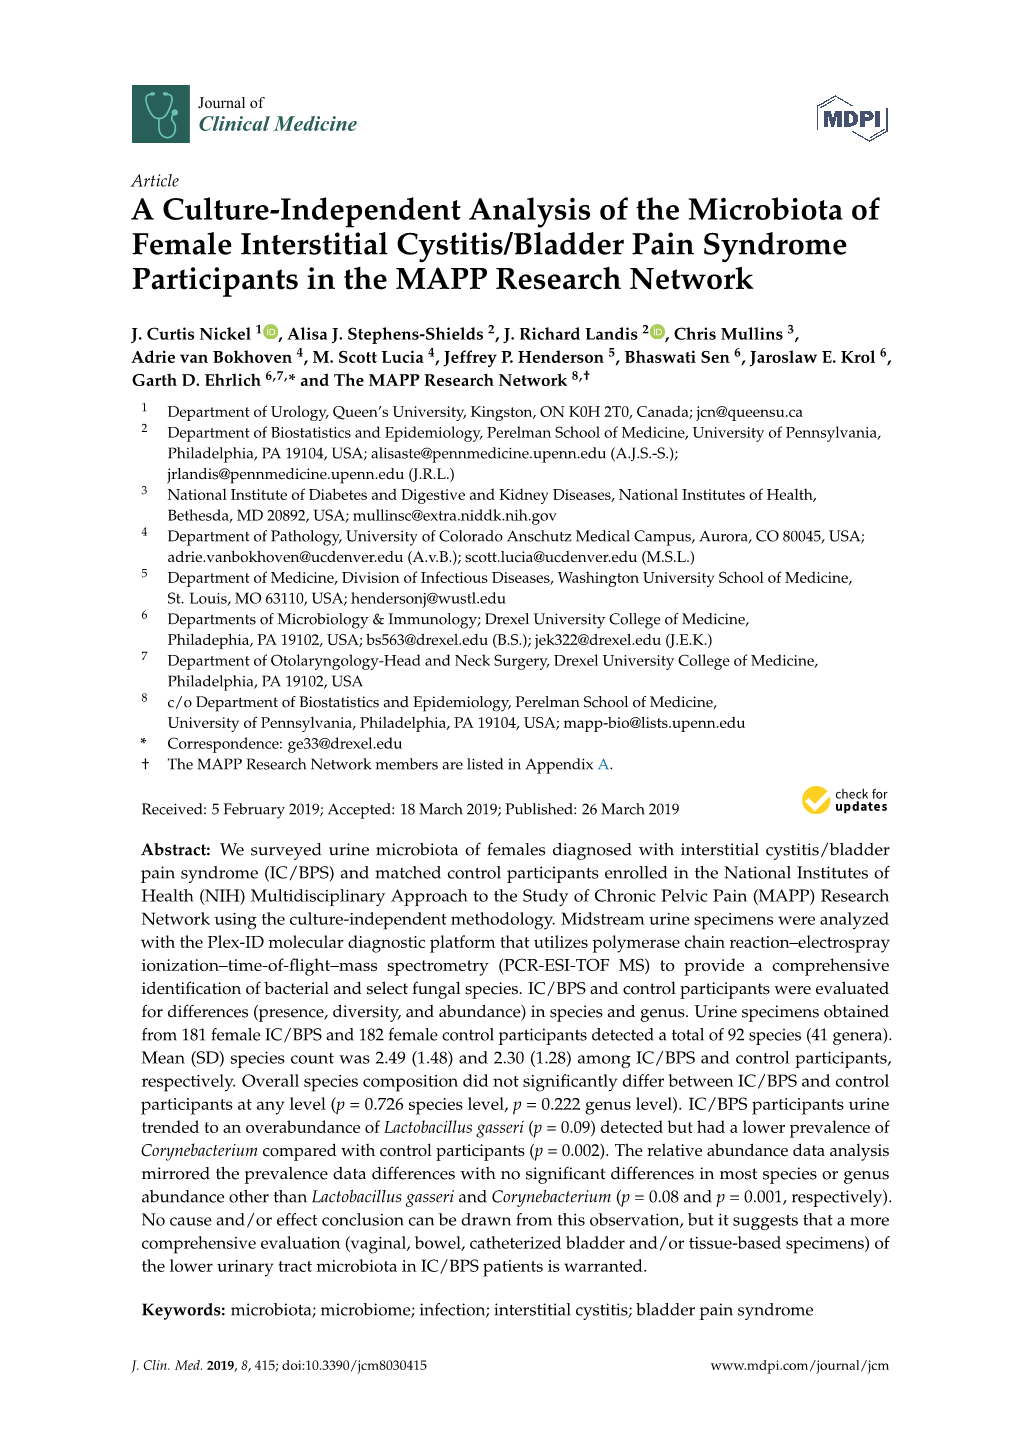 A Culture-Independent Analysis of the Microbiota of Female Interstitial Cystitis/Bladder Pain Syndrome Participants in the MAPP Research Network